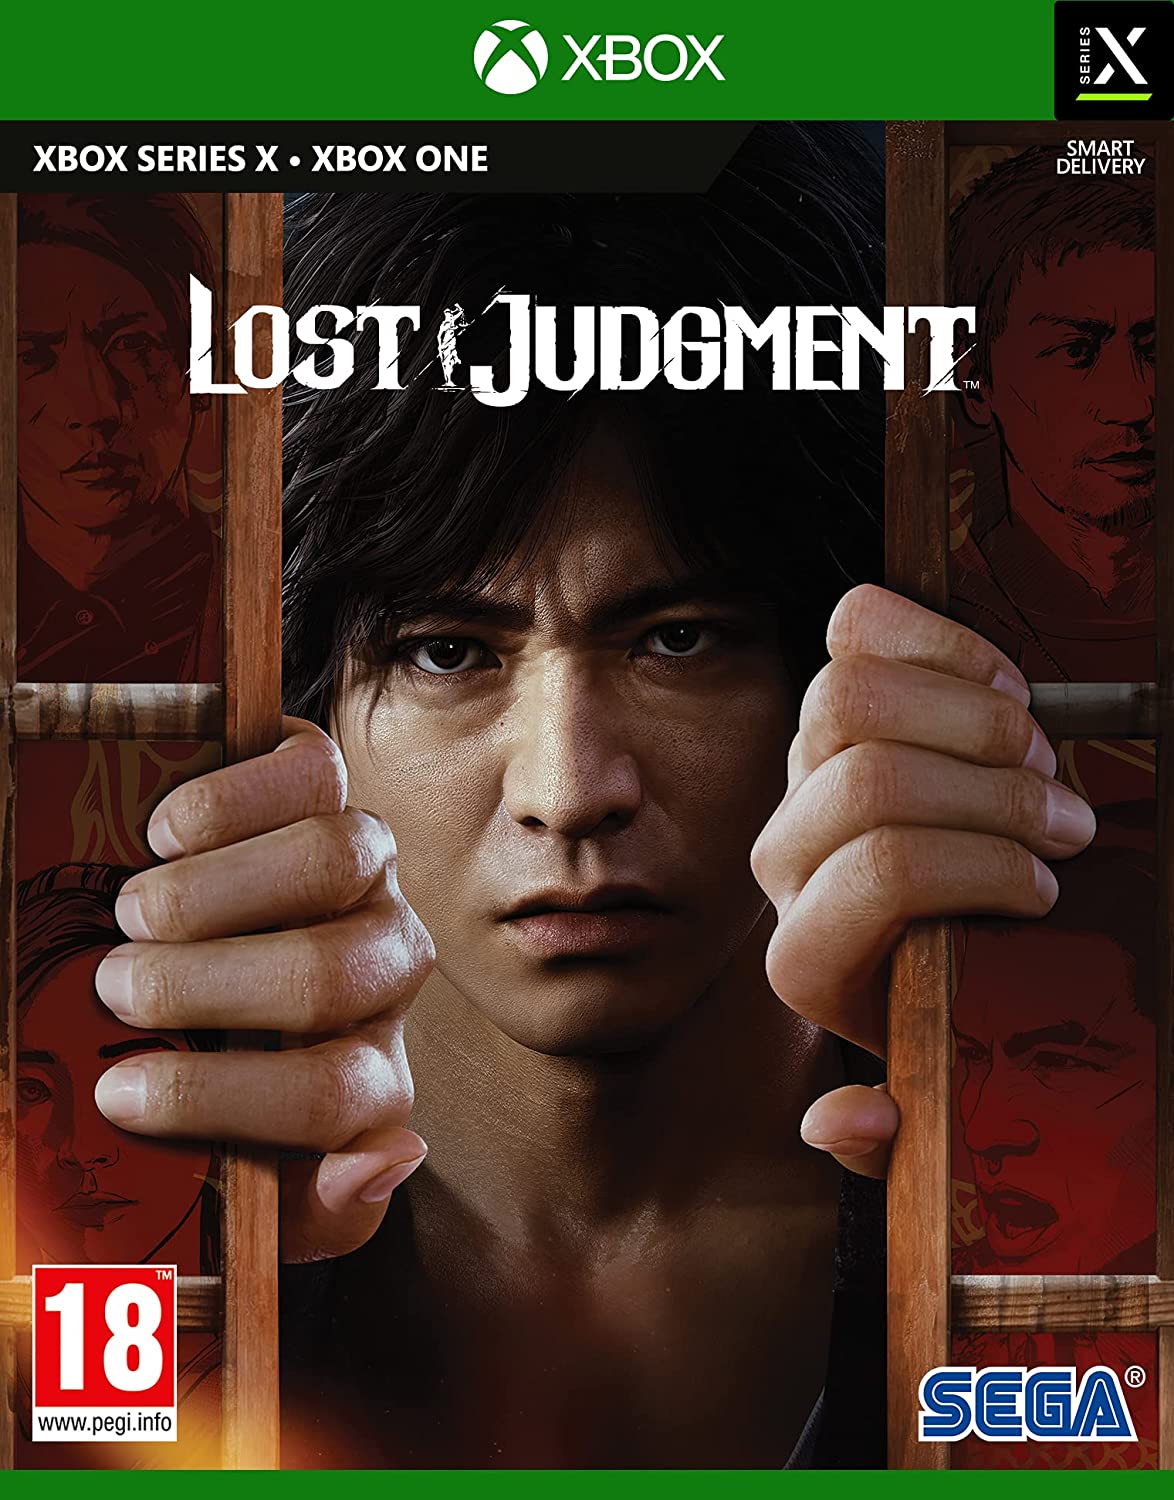 Lost Judgment - Xbox One and Xbox Series X | Yard's Games Ltd